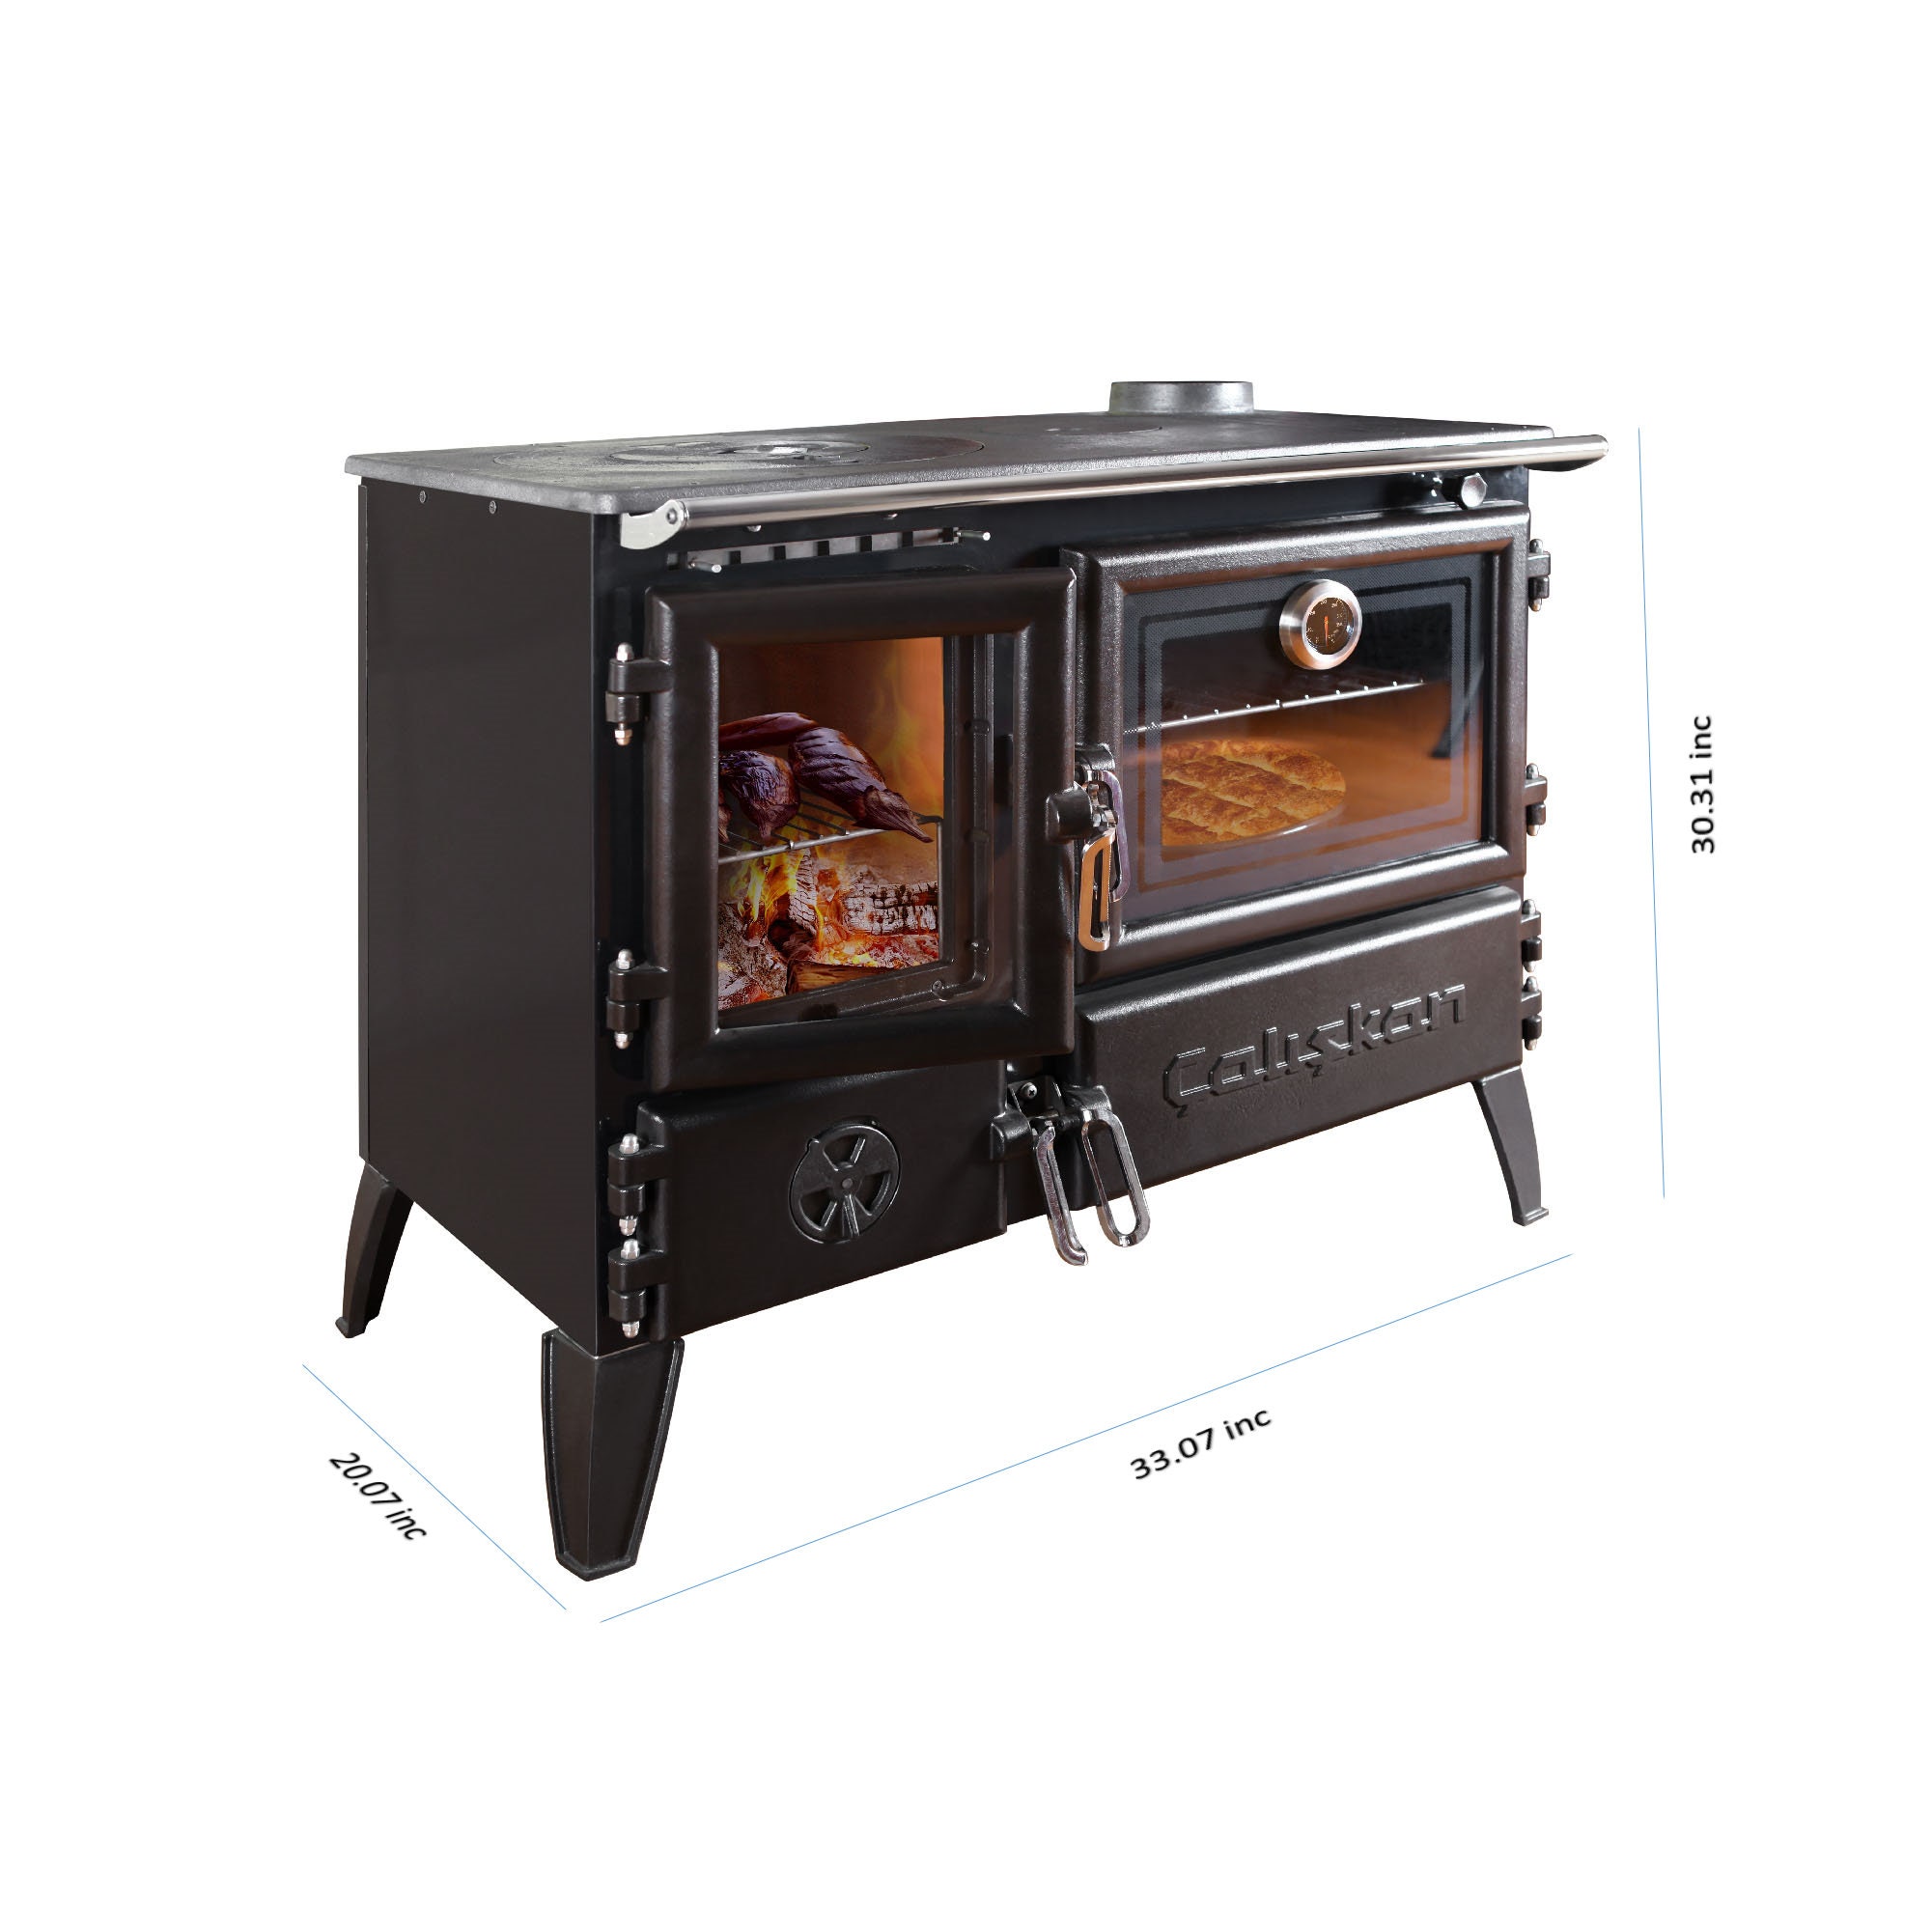 Samba Wood Stove for Cooking Baking and Heating, Cast Iron